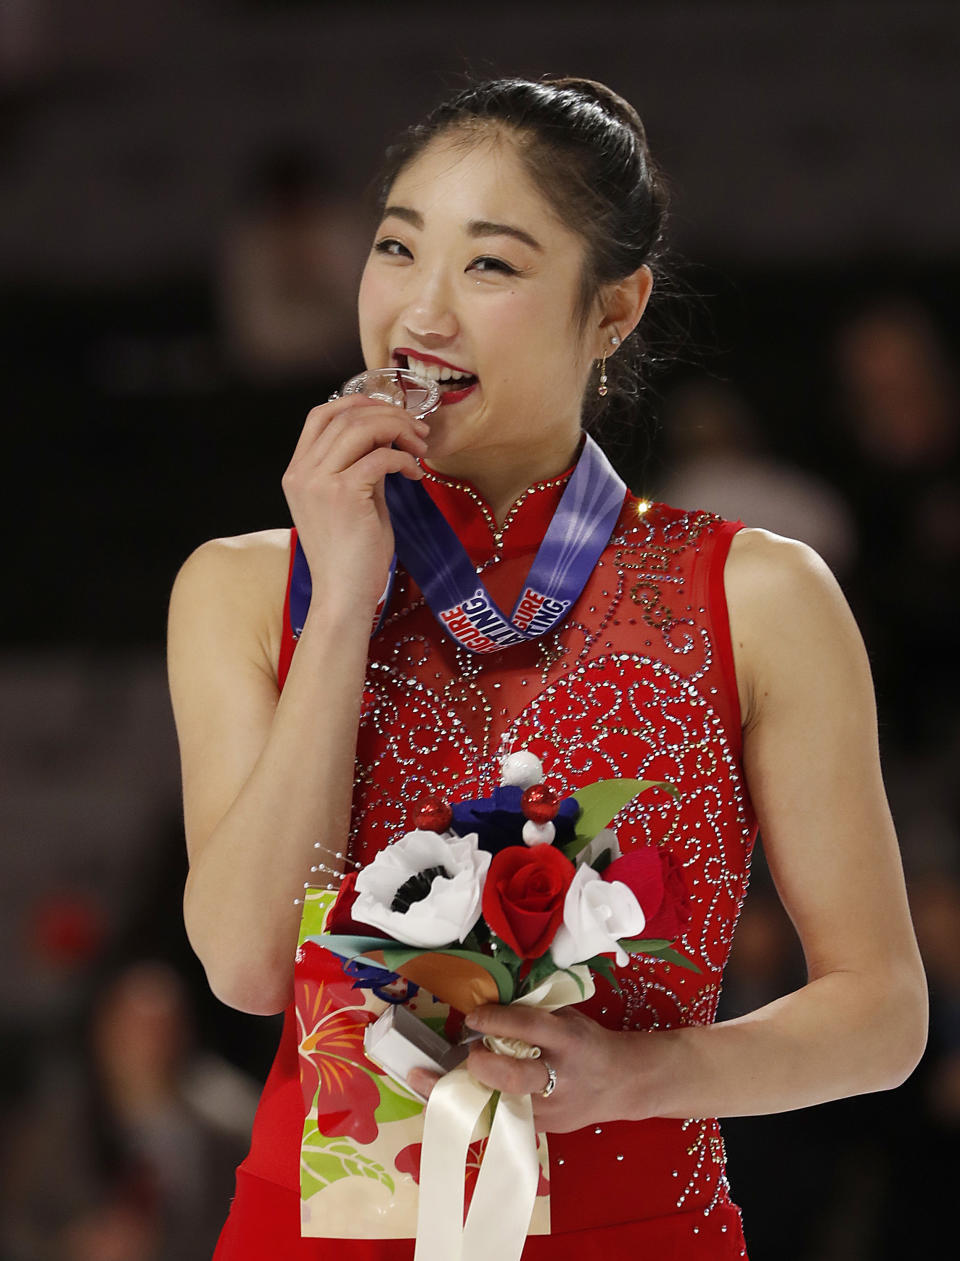 Mirai Nagasu poses after finishing second in the women’s free skate event at the U.S. Figure Skating Championships in San Jose, Calif., on Jan. 5, 2018. (AP Photo/Tony Avelar)